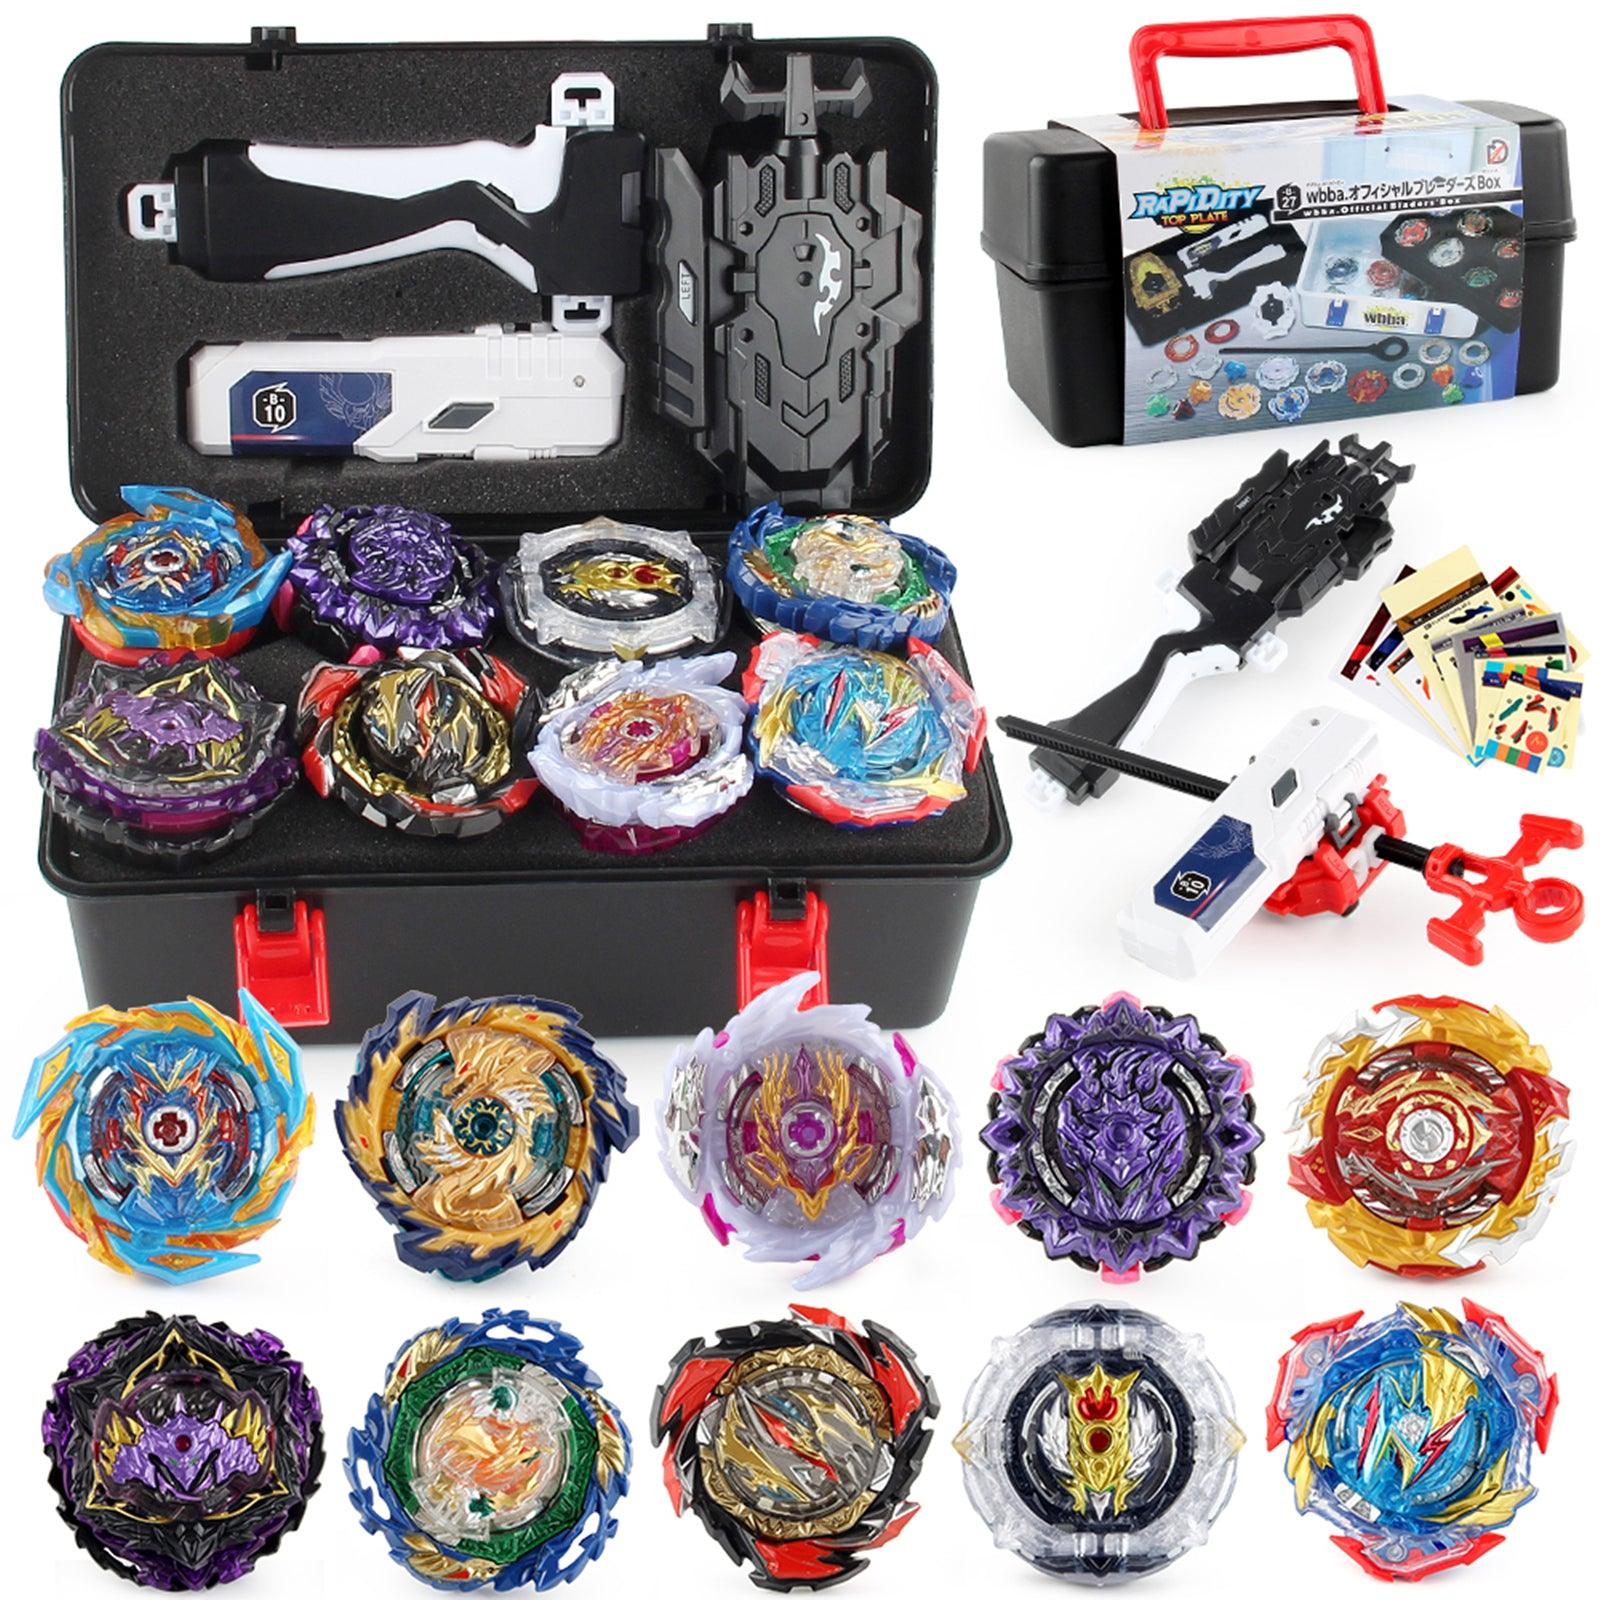 Bey Burst Battling Top Game Gyros Set 12 Pieces Battle Blades Evolution Metal Fusion Spinning Tops Toys 3 Launchers with Storage Box Gifts for Boys Kids Children Age 6+